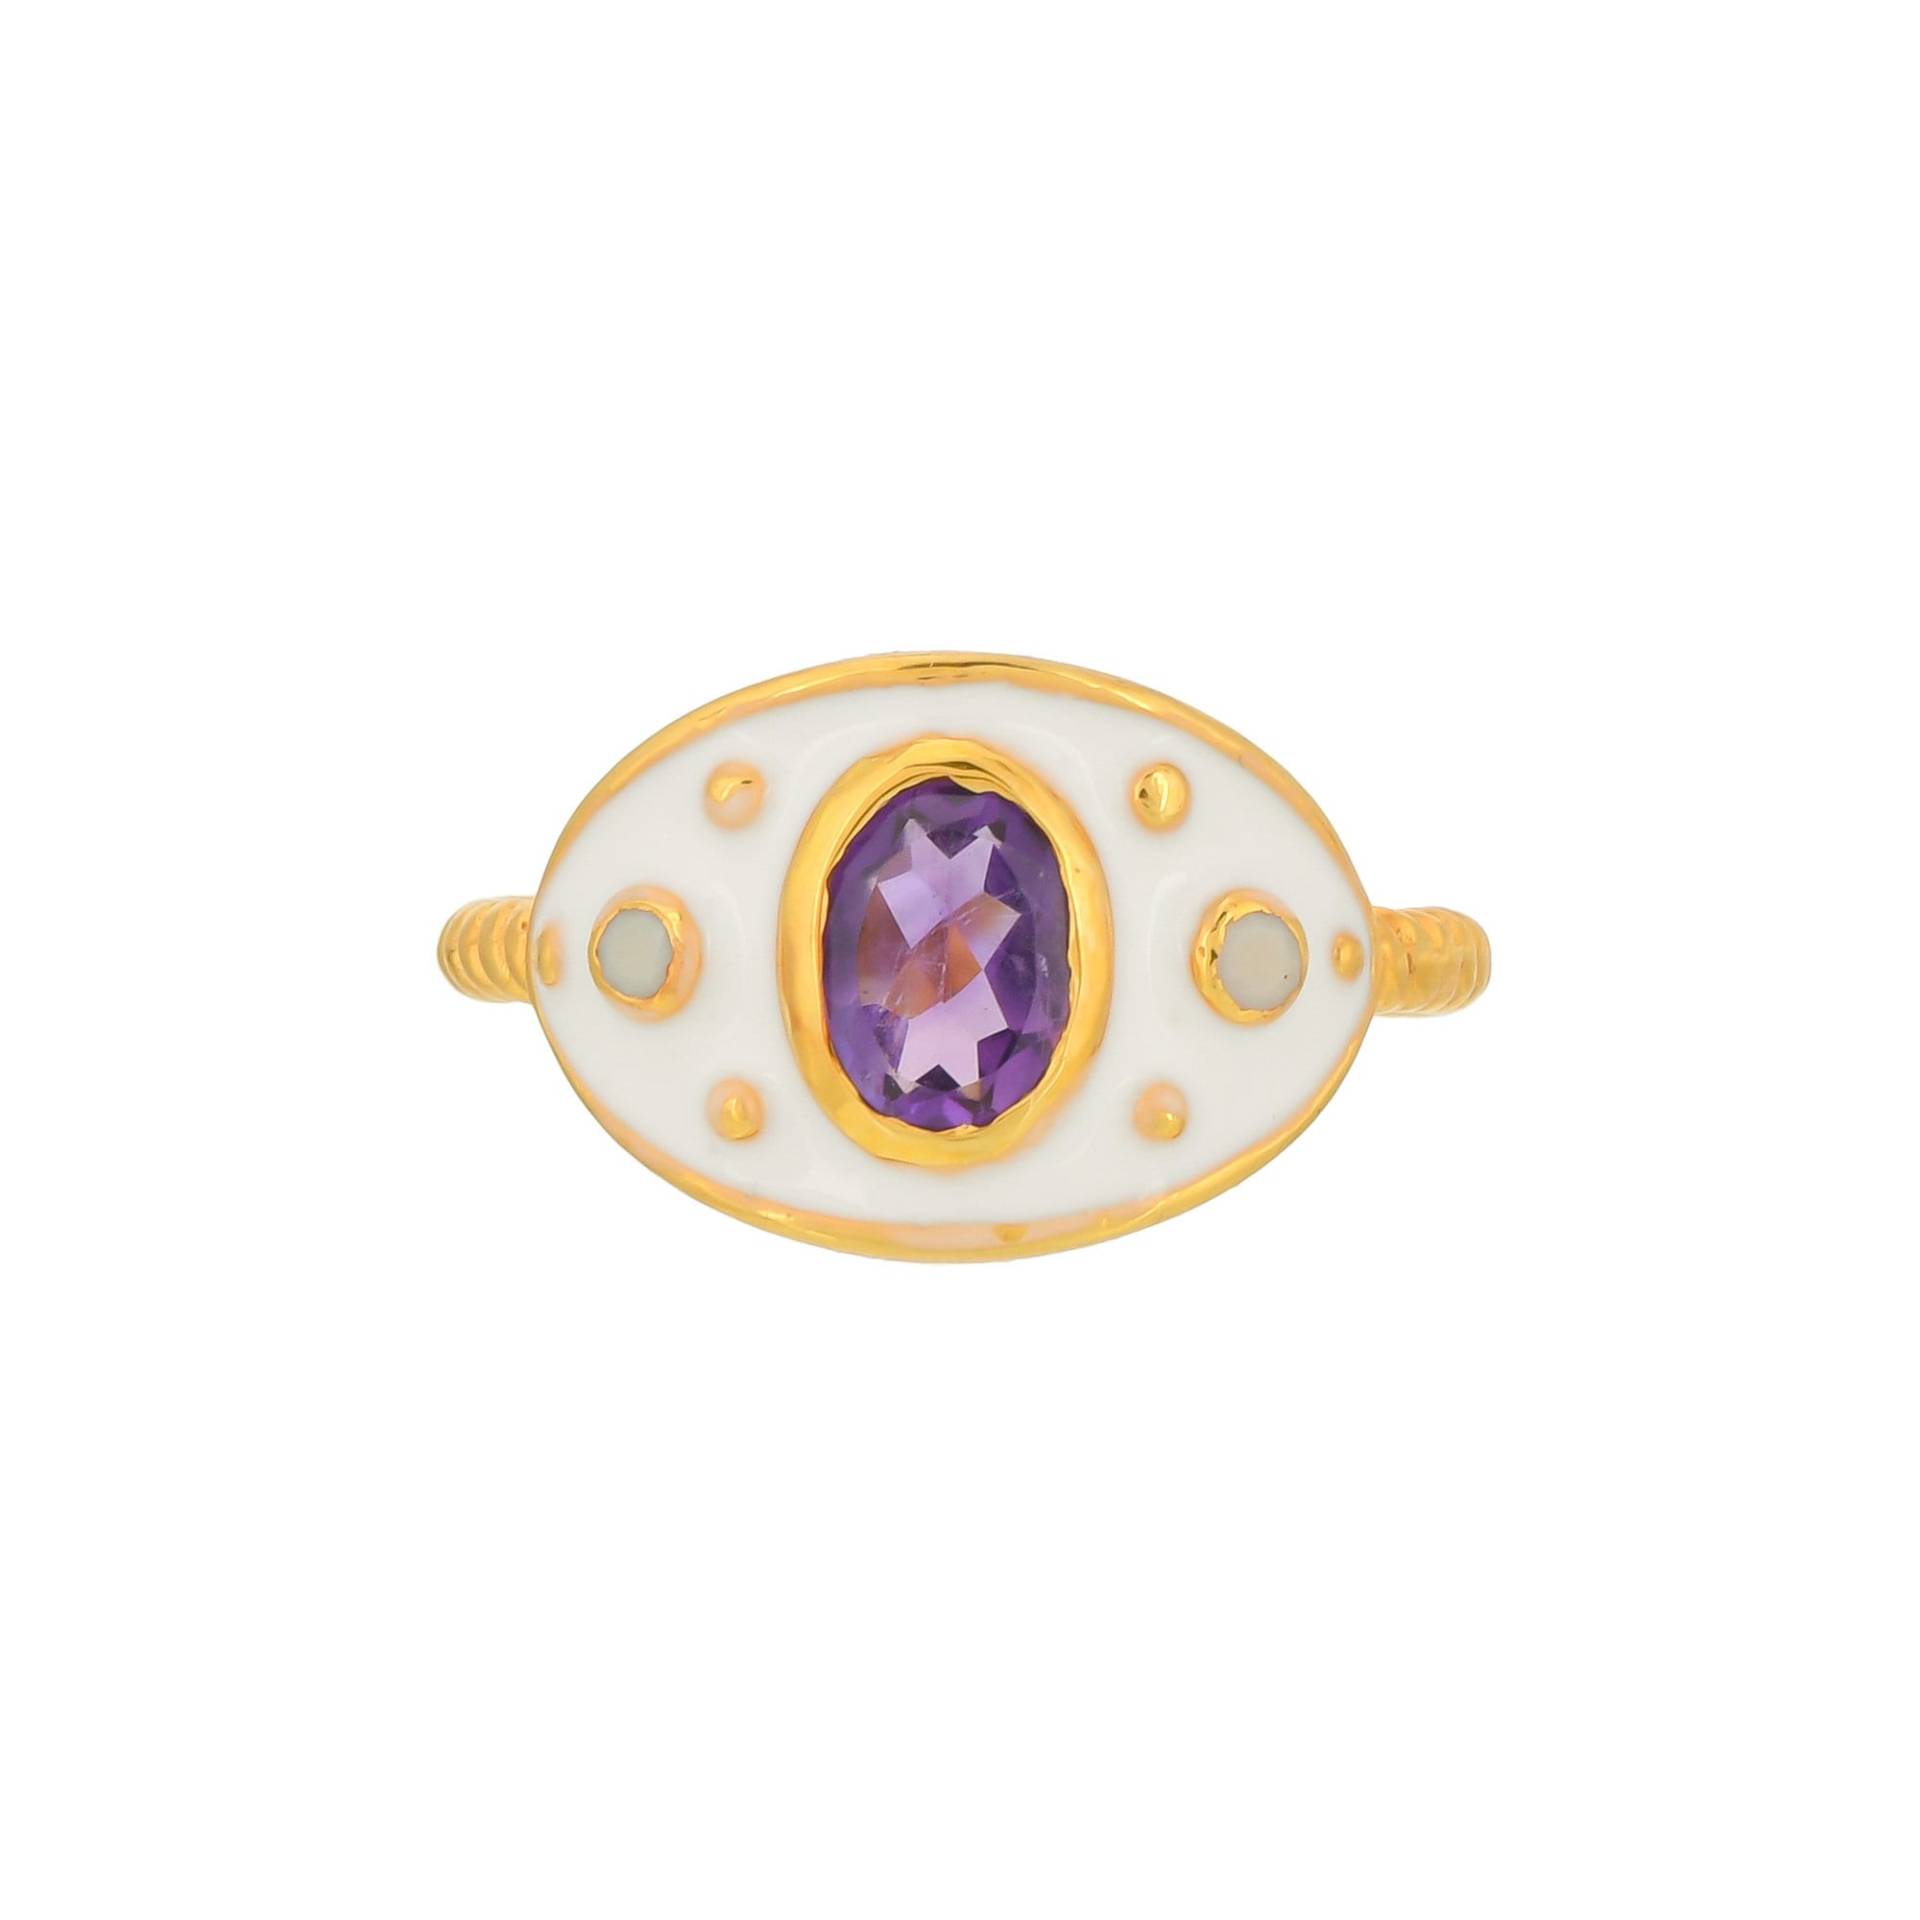 Amethyst & Perle 14K Gold Vermeil Over Sterling Silber Art Deco Emaille Ring von TreasureDiary